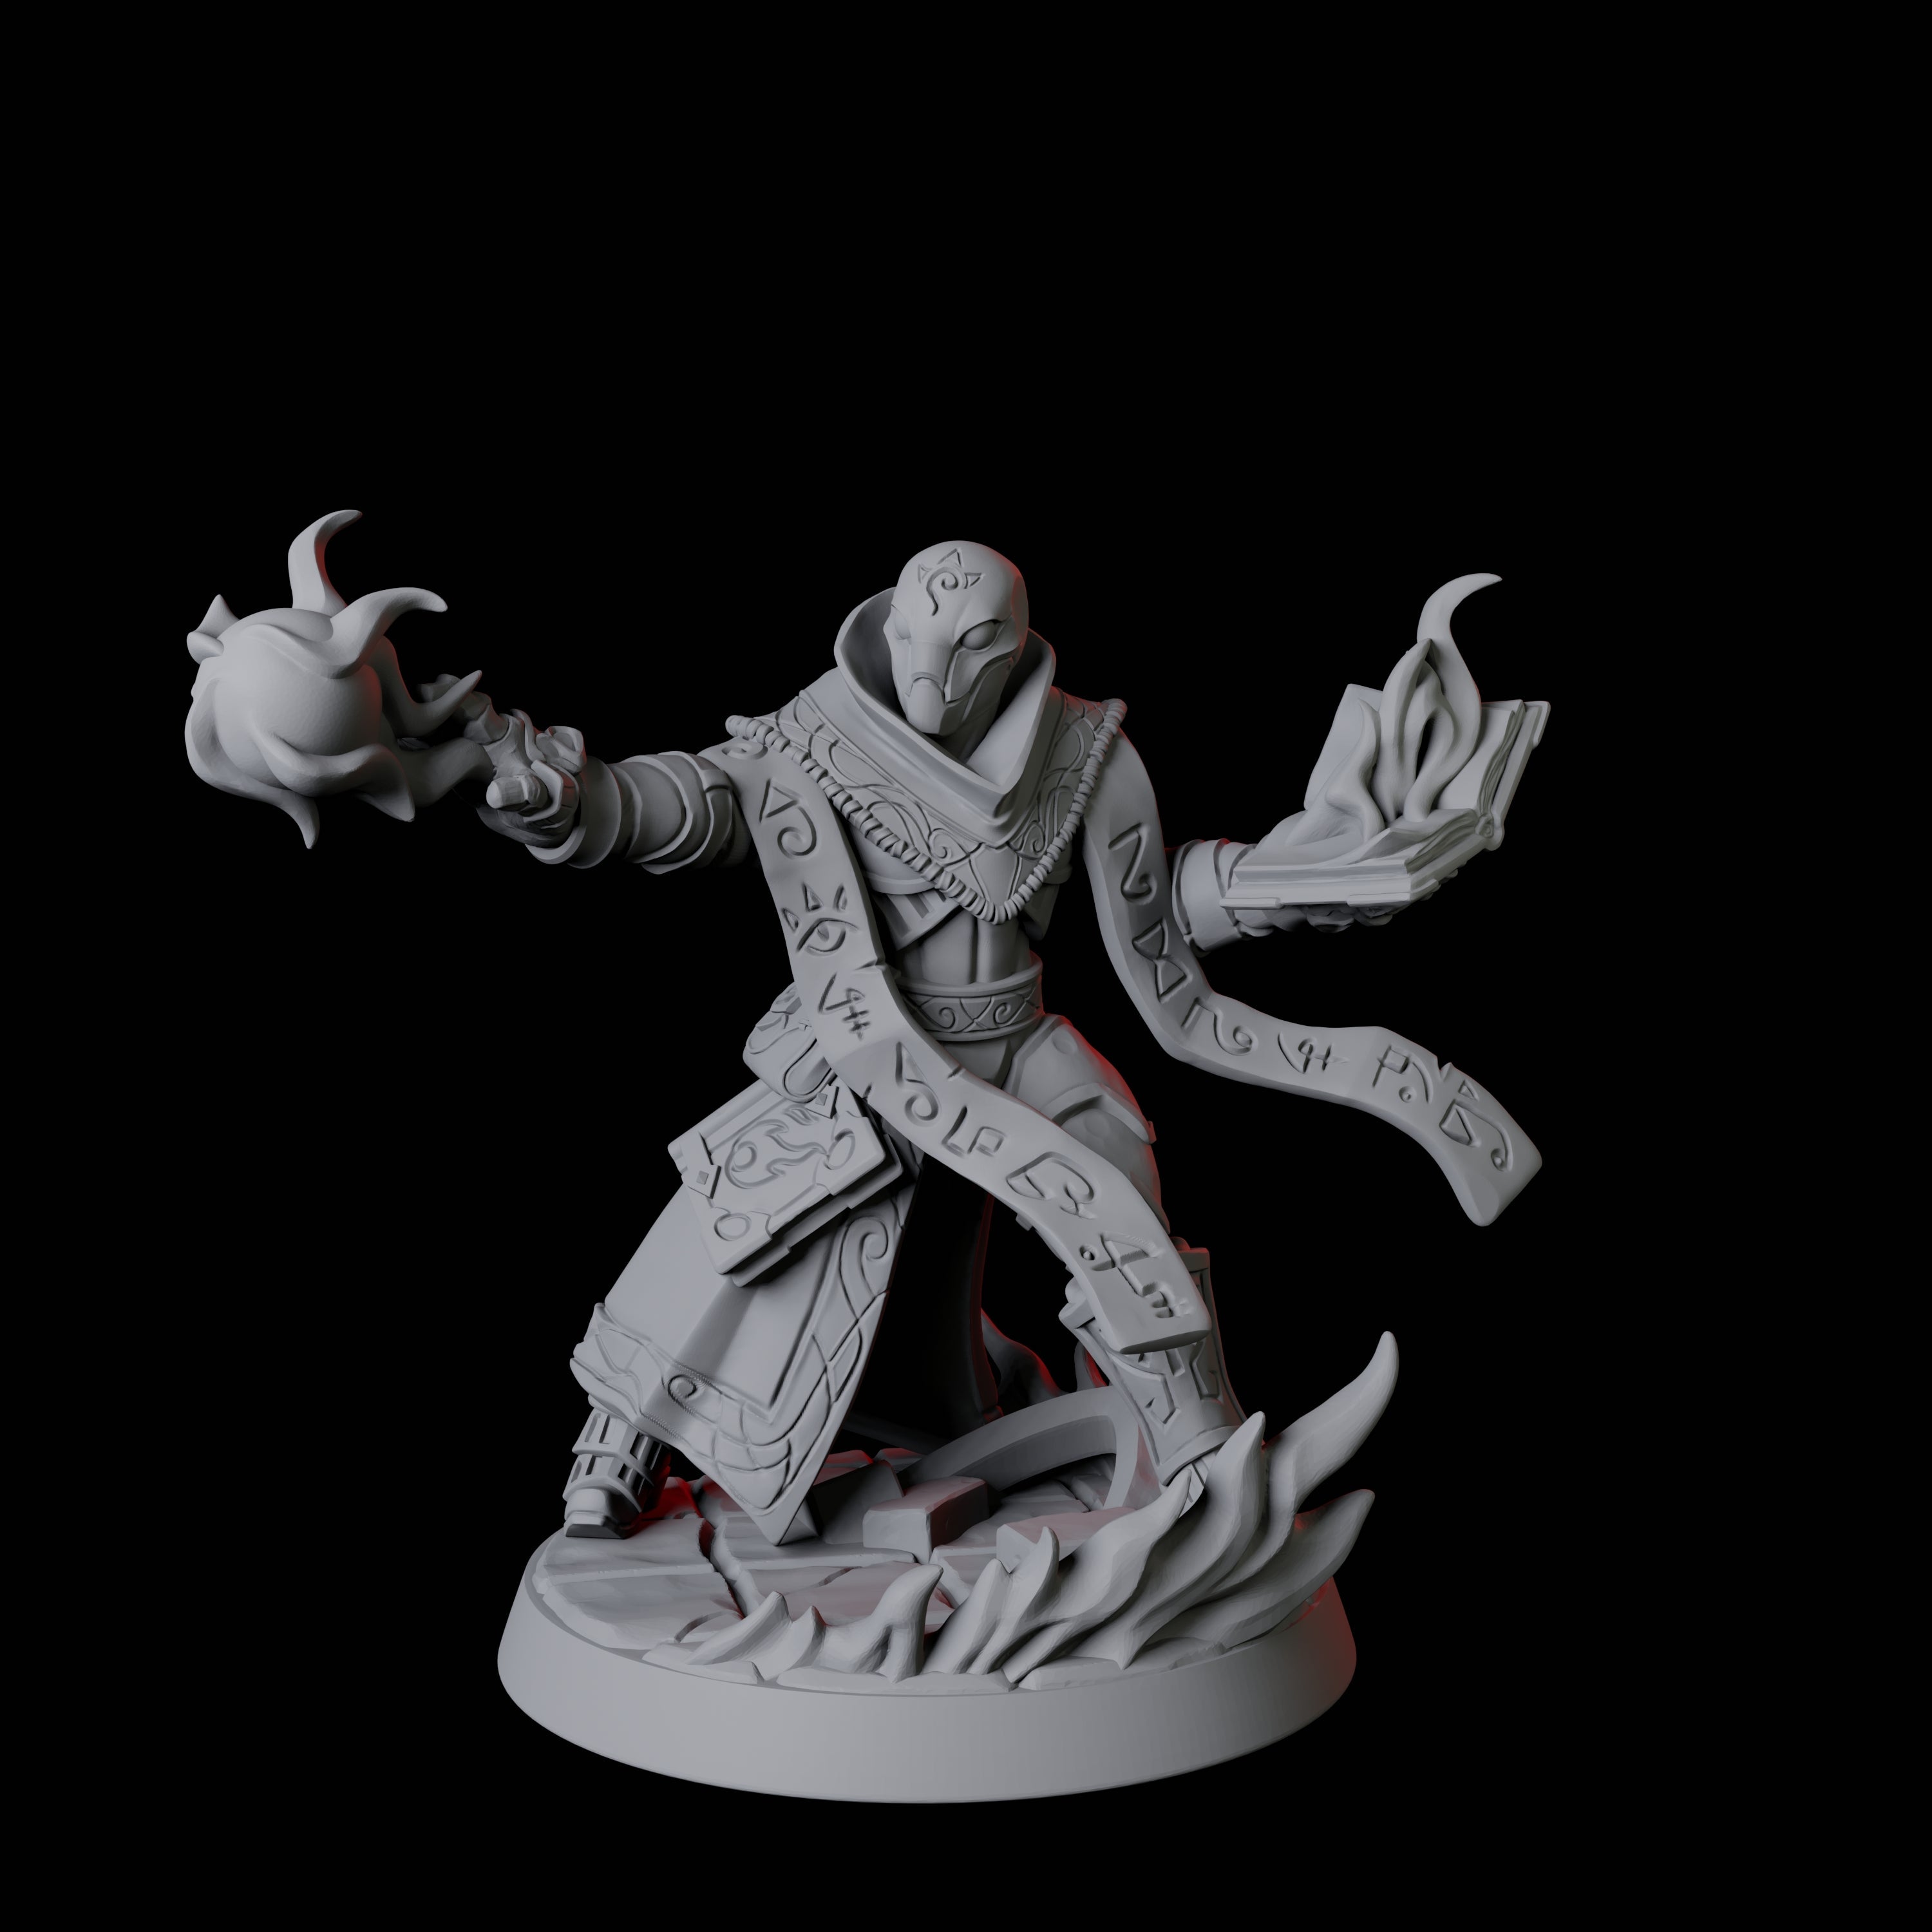 Warforged Wizard Miniature for Dungeons and Dragons, Pathfinder or other TTRPGs